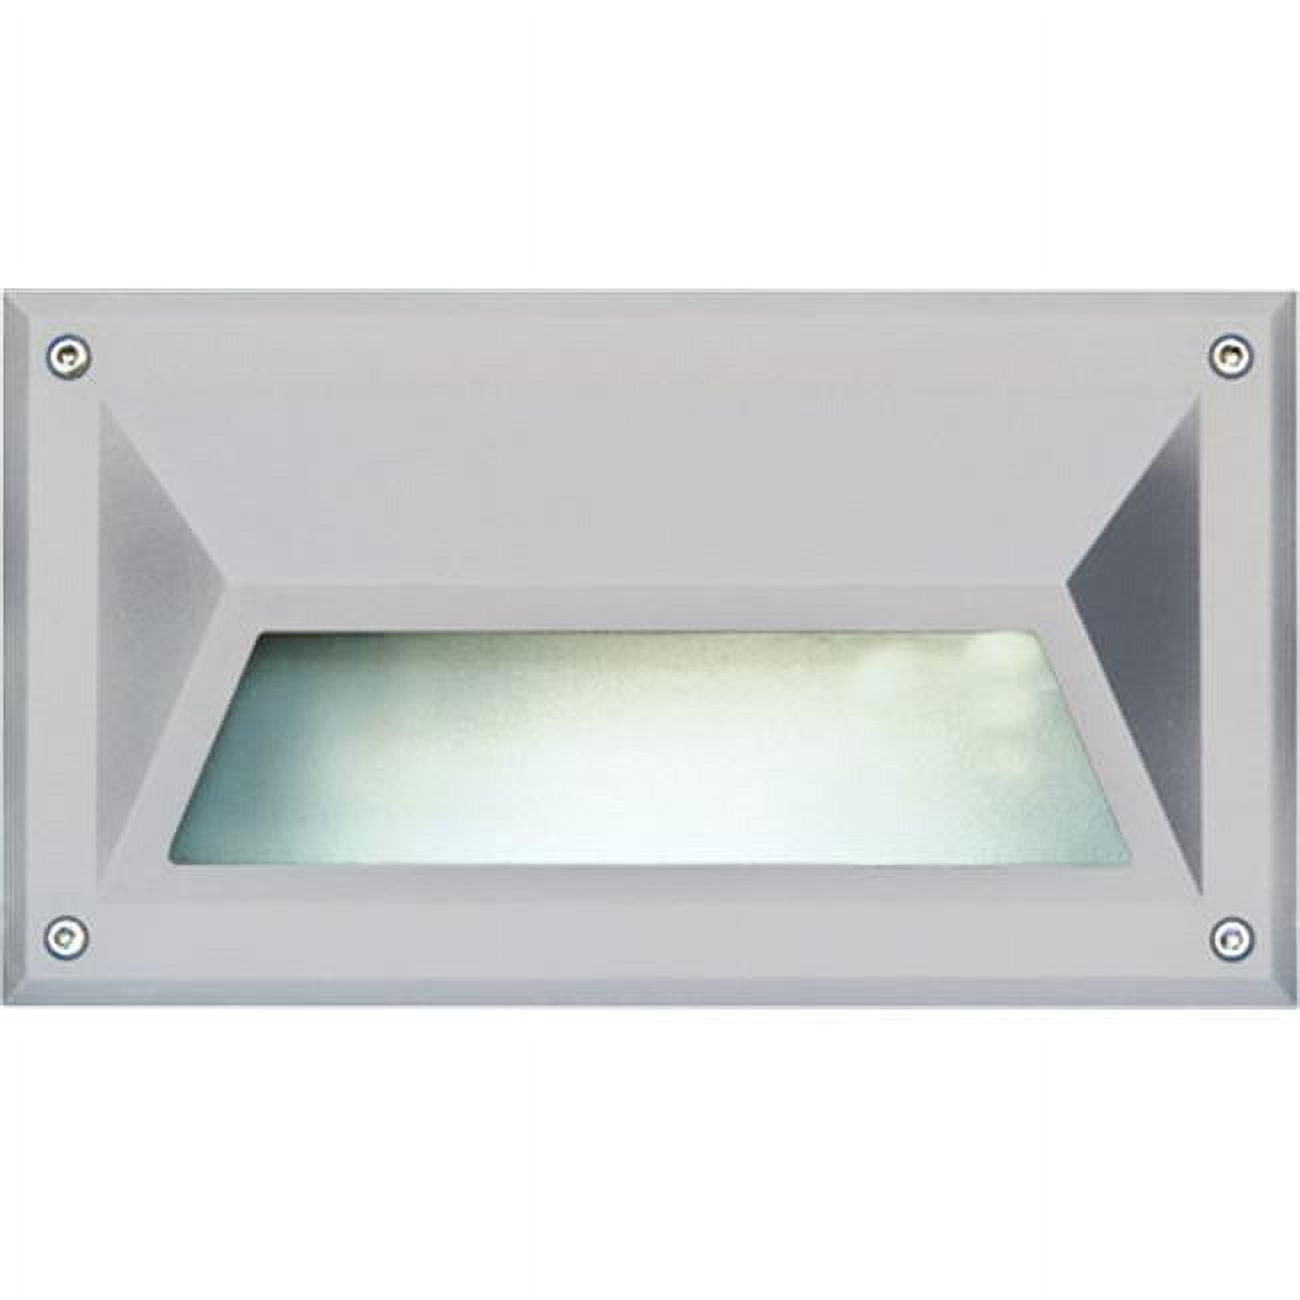 Picture of Dabmar Lighting DSL1033-W Recessed Hooded Brick, Step & Wall Light, White - 5 x 8.90 x 3.75 in.